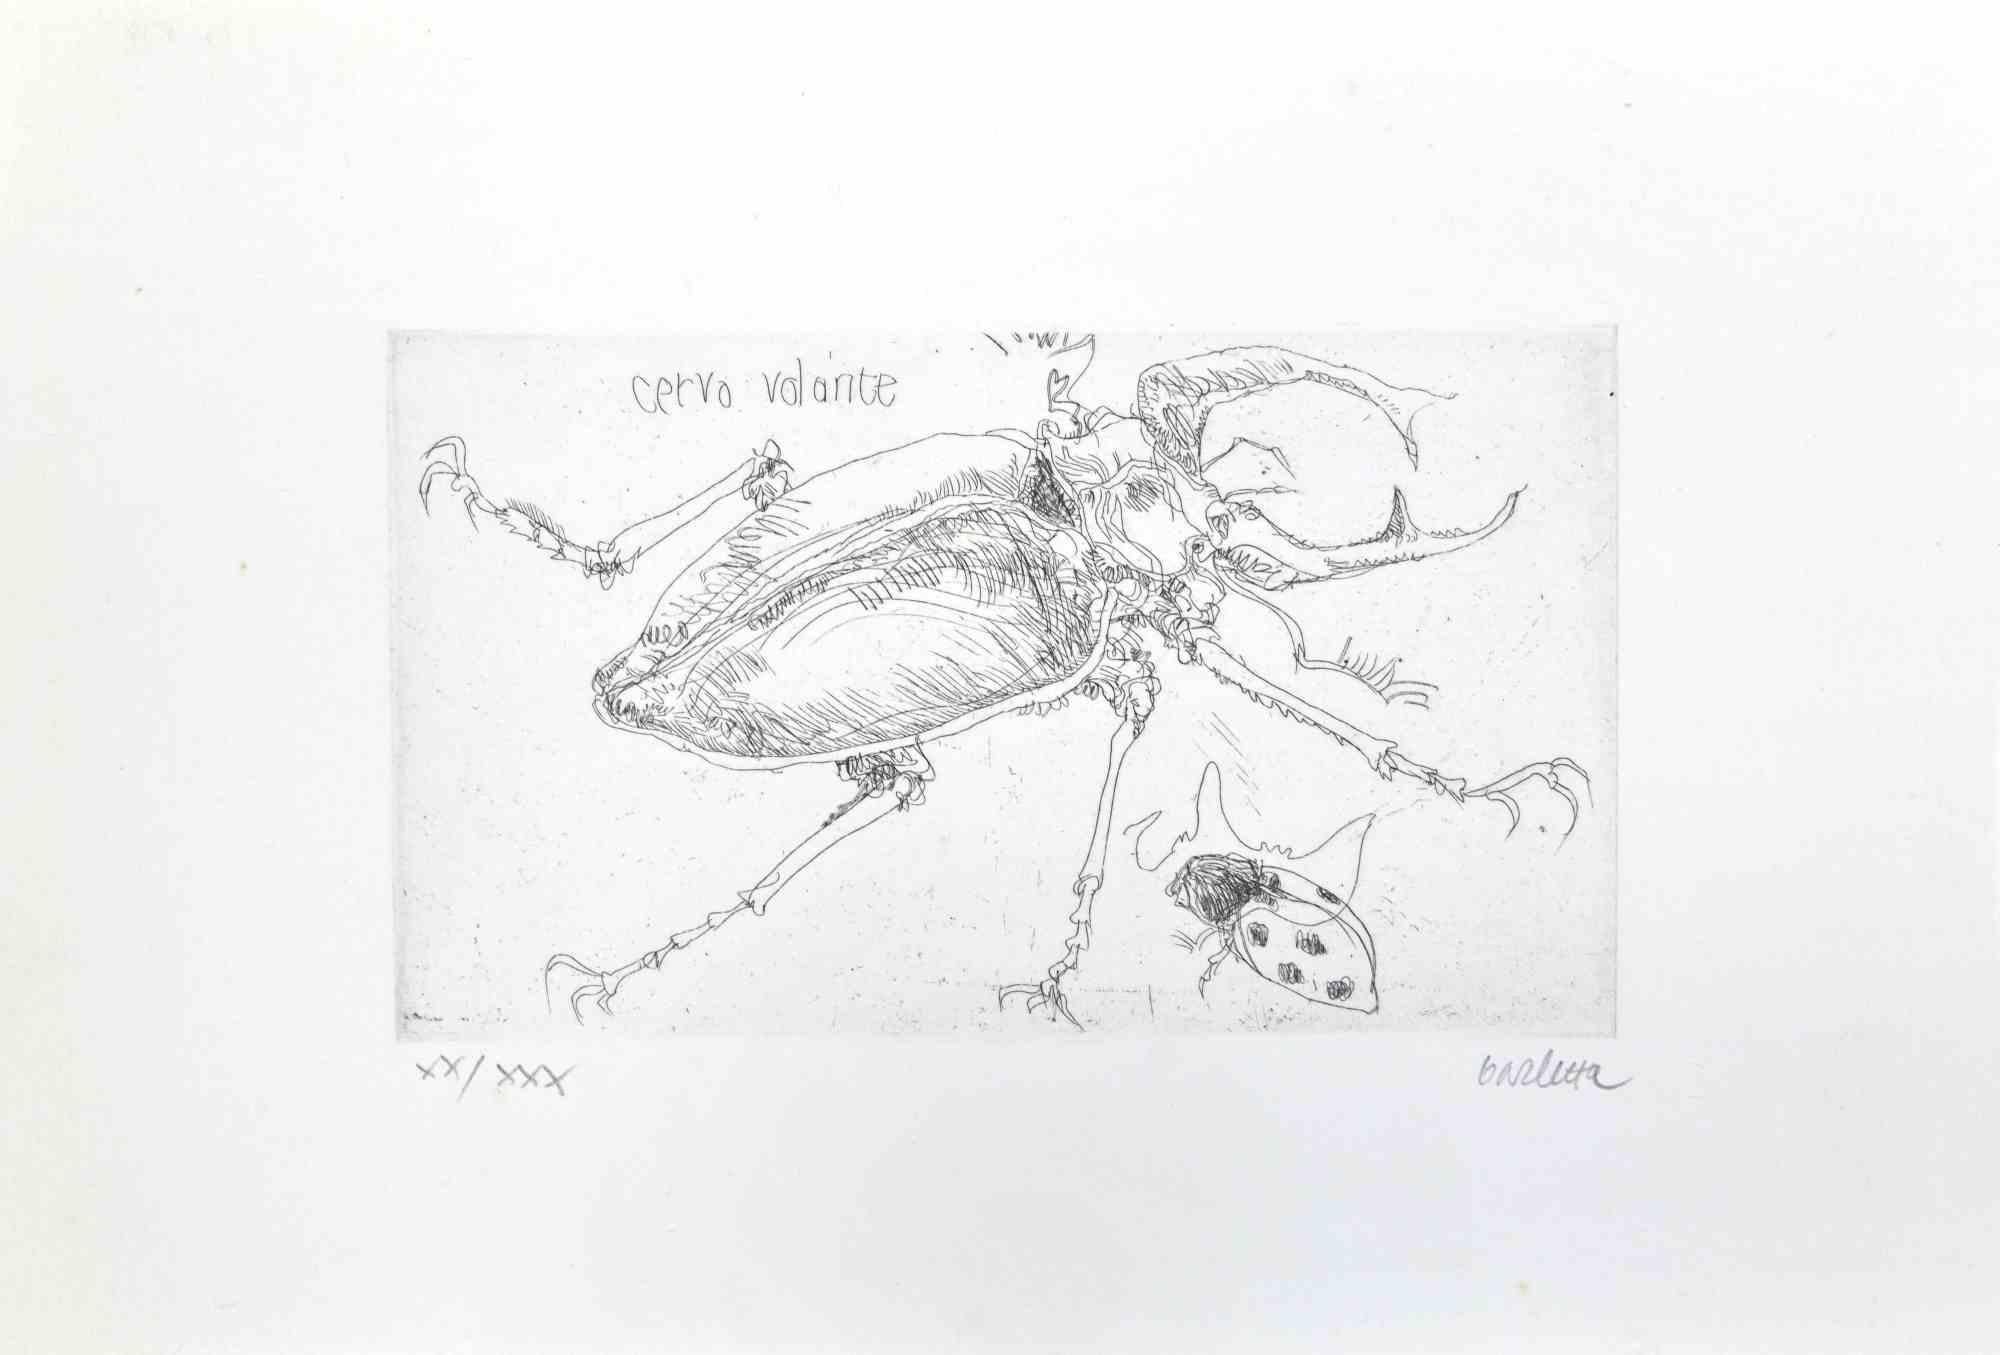 Insects  is an etching realized by Sergio Barletta in 1974.

Hand-signed in pencil on the lower right. Numbered on the lower left in Roman numerals, from the edition of XXX prints.

Titled in Italian at the top left "Cervo Volante".

Edition